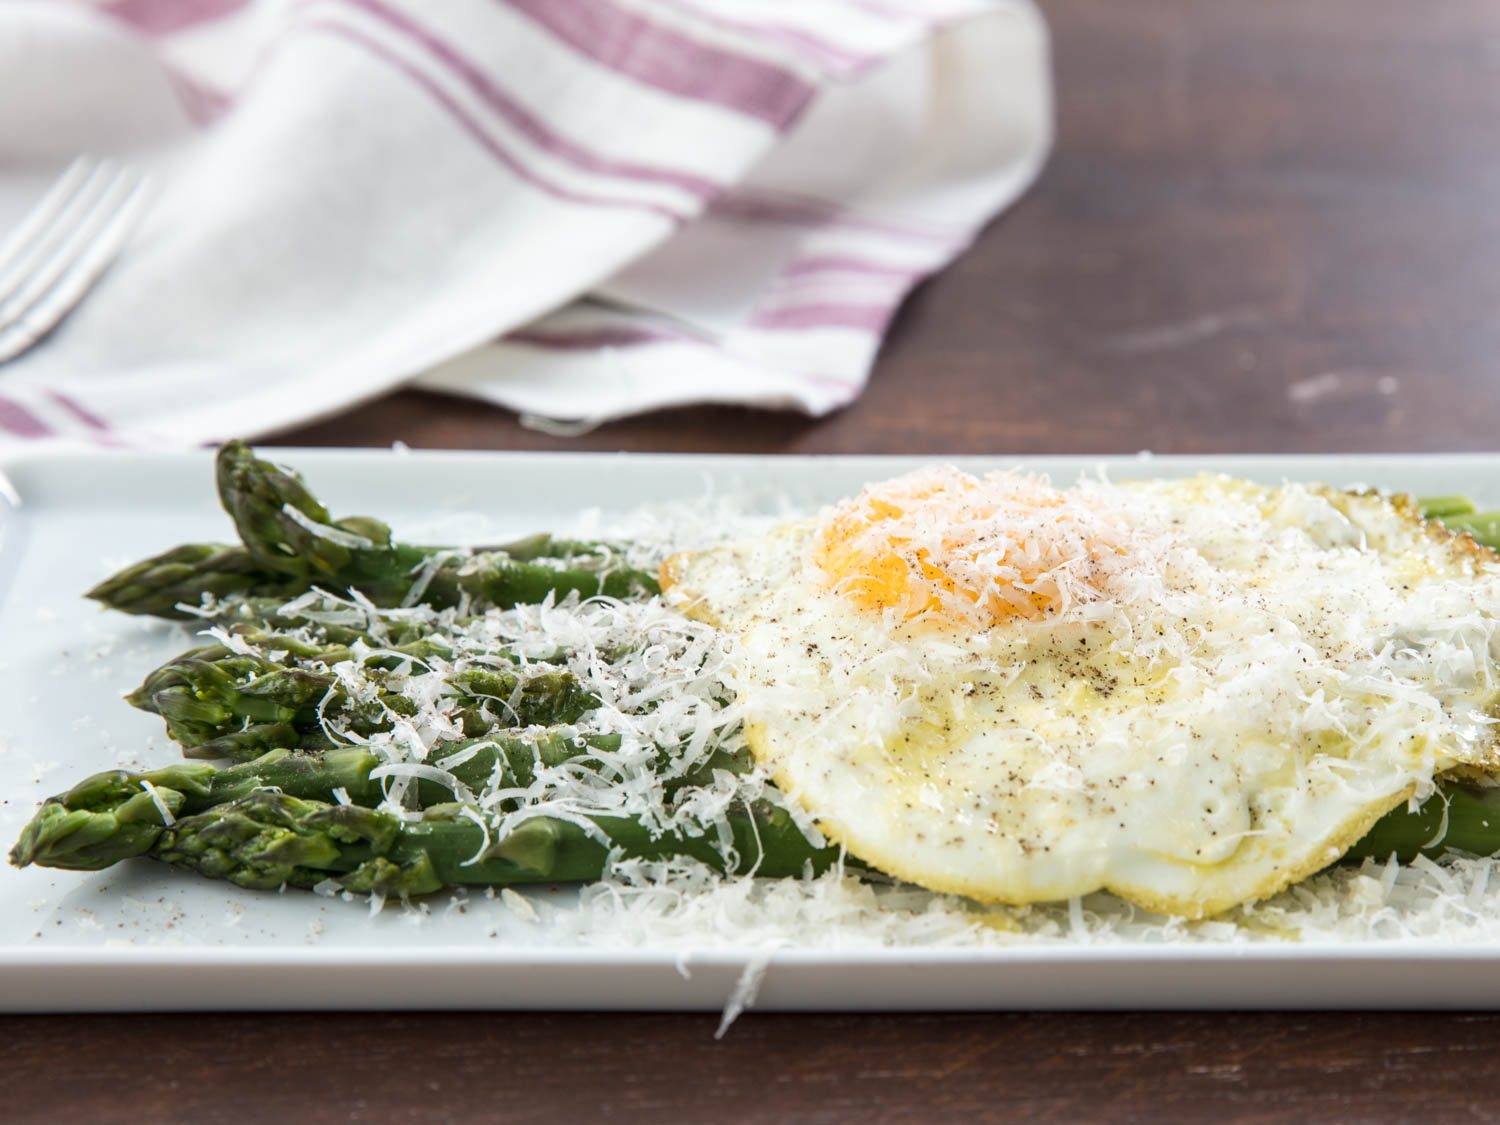 Asparagus alla Milanese (Poached Asparagus With Fried Egg and Parmesan Cheese)